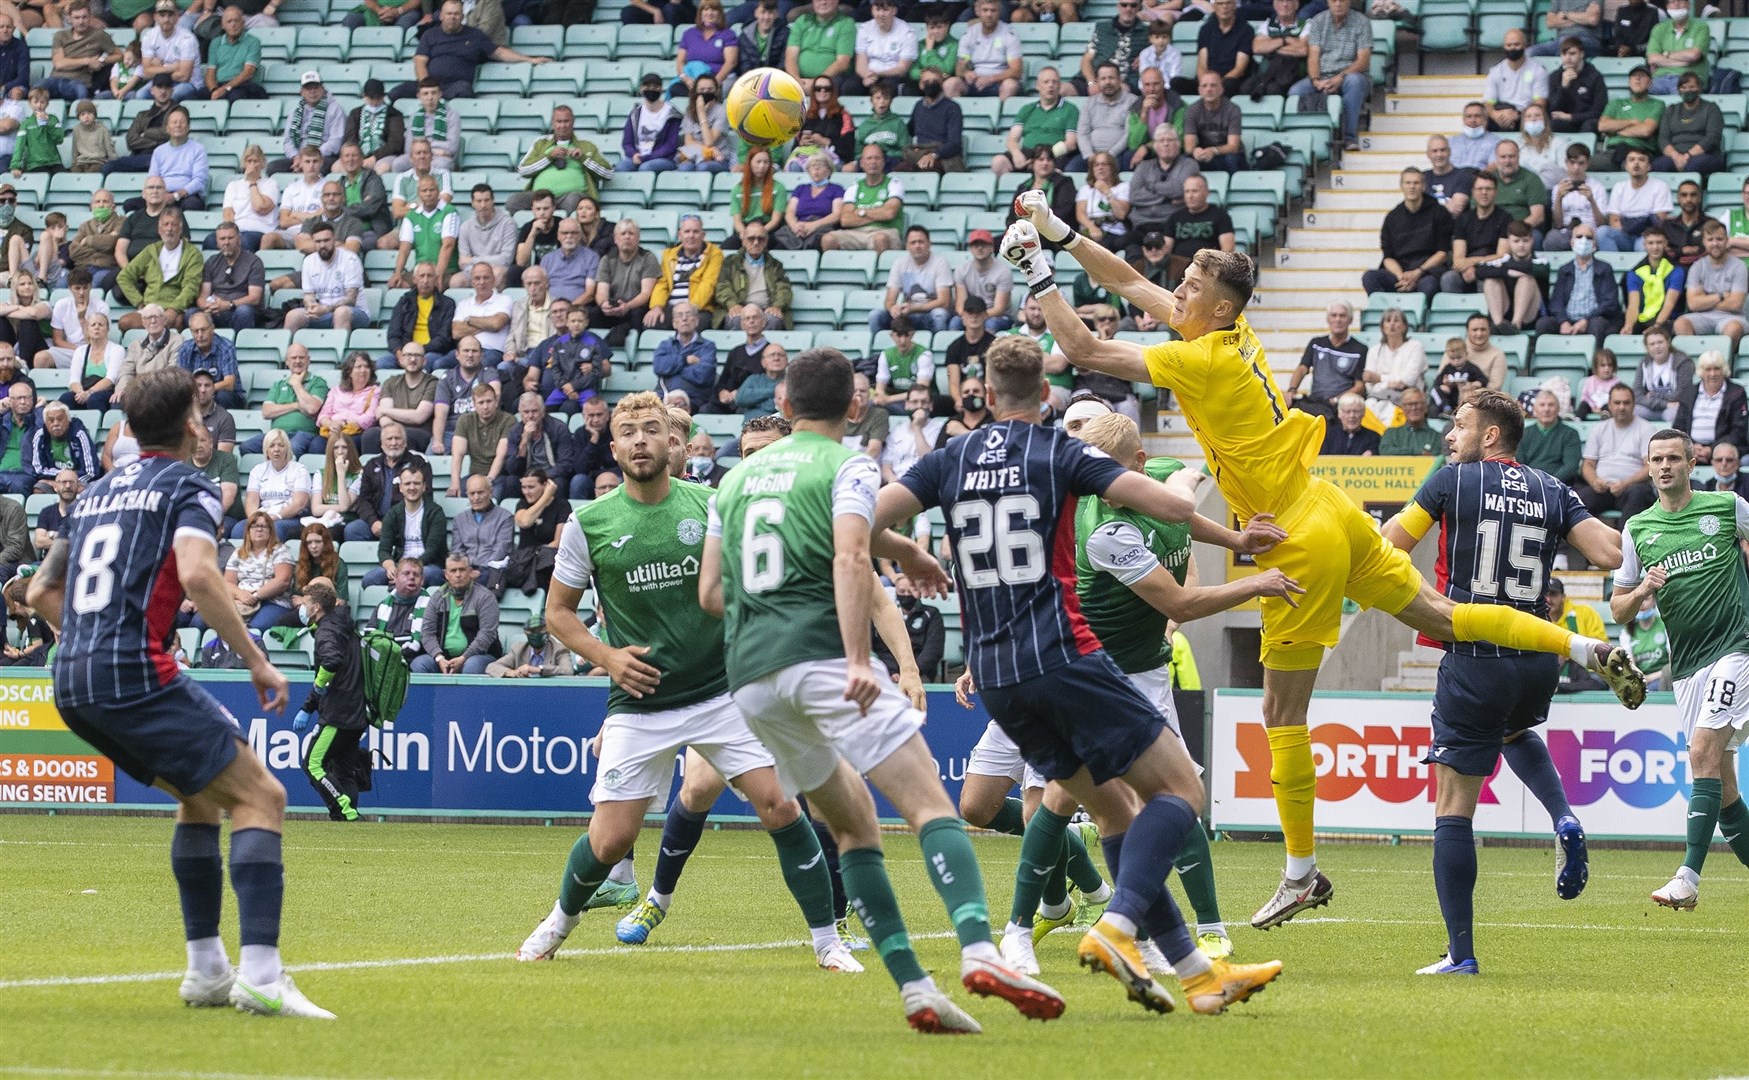 Picture - Ken Macpherson, Inverness. Hibs(3) v Ross County(0). 08.08.21. Hibs 'keeper Matt Macey punches clear from a County attack in the first 5 minutes.